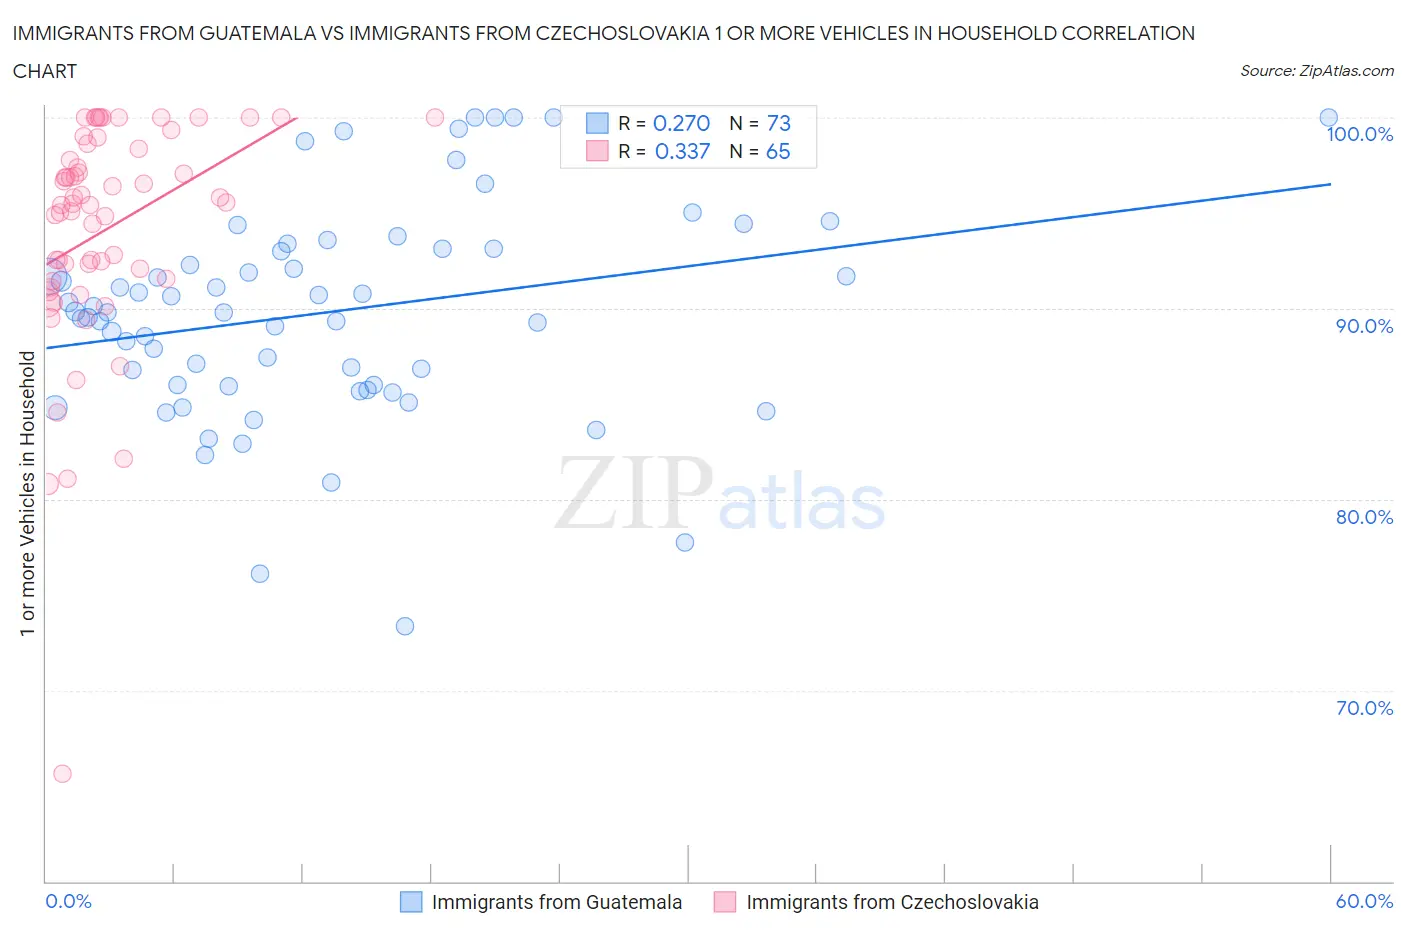 Immigrants from Guatemala vs Immigrants from Czechoslovakia 1 or more Vehicles in Household